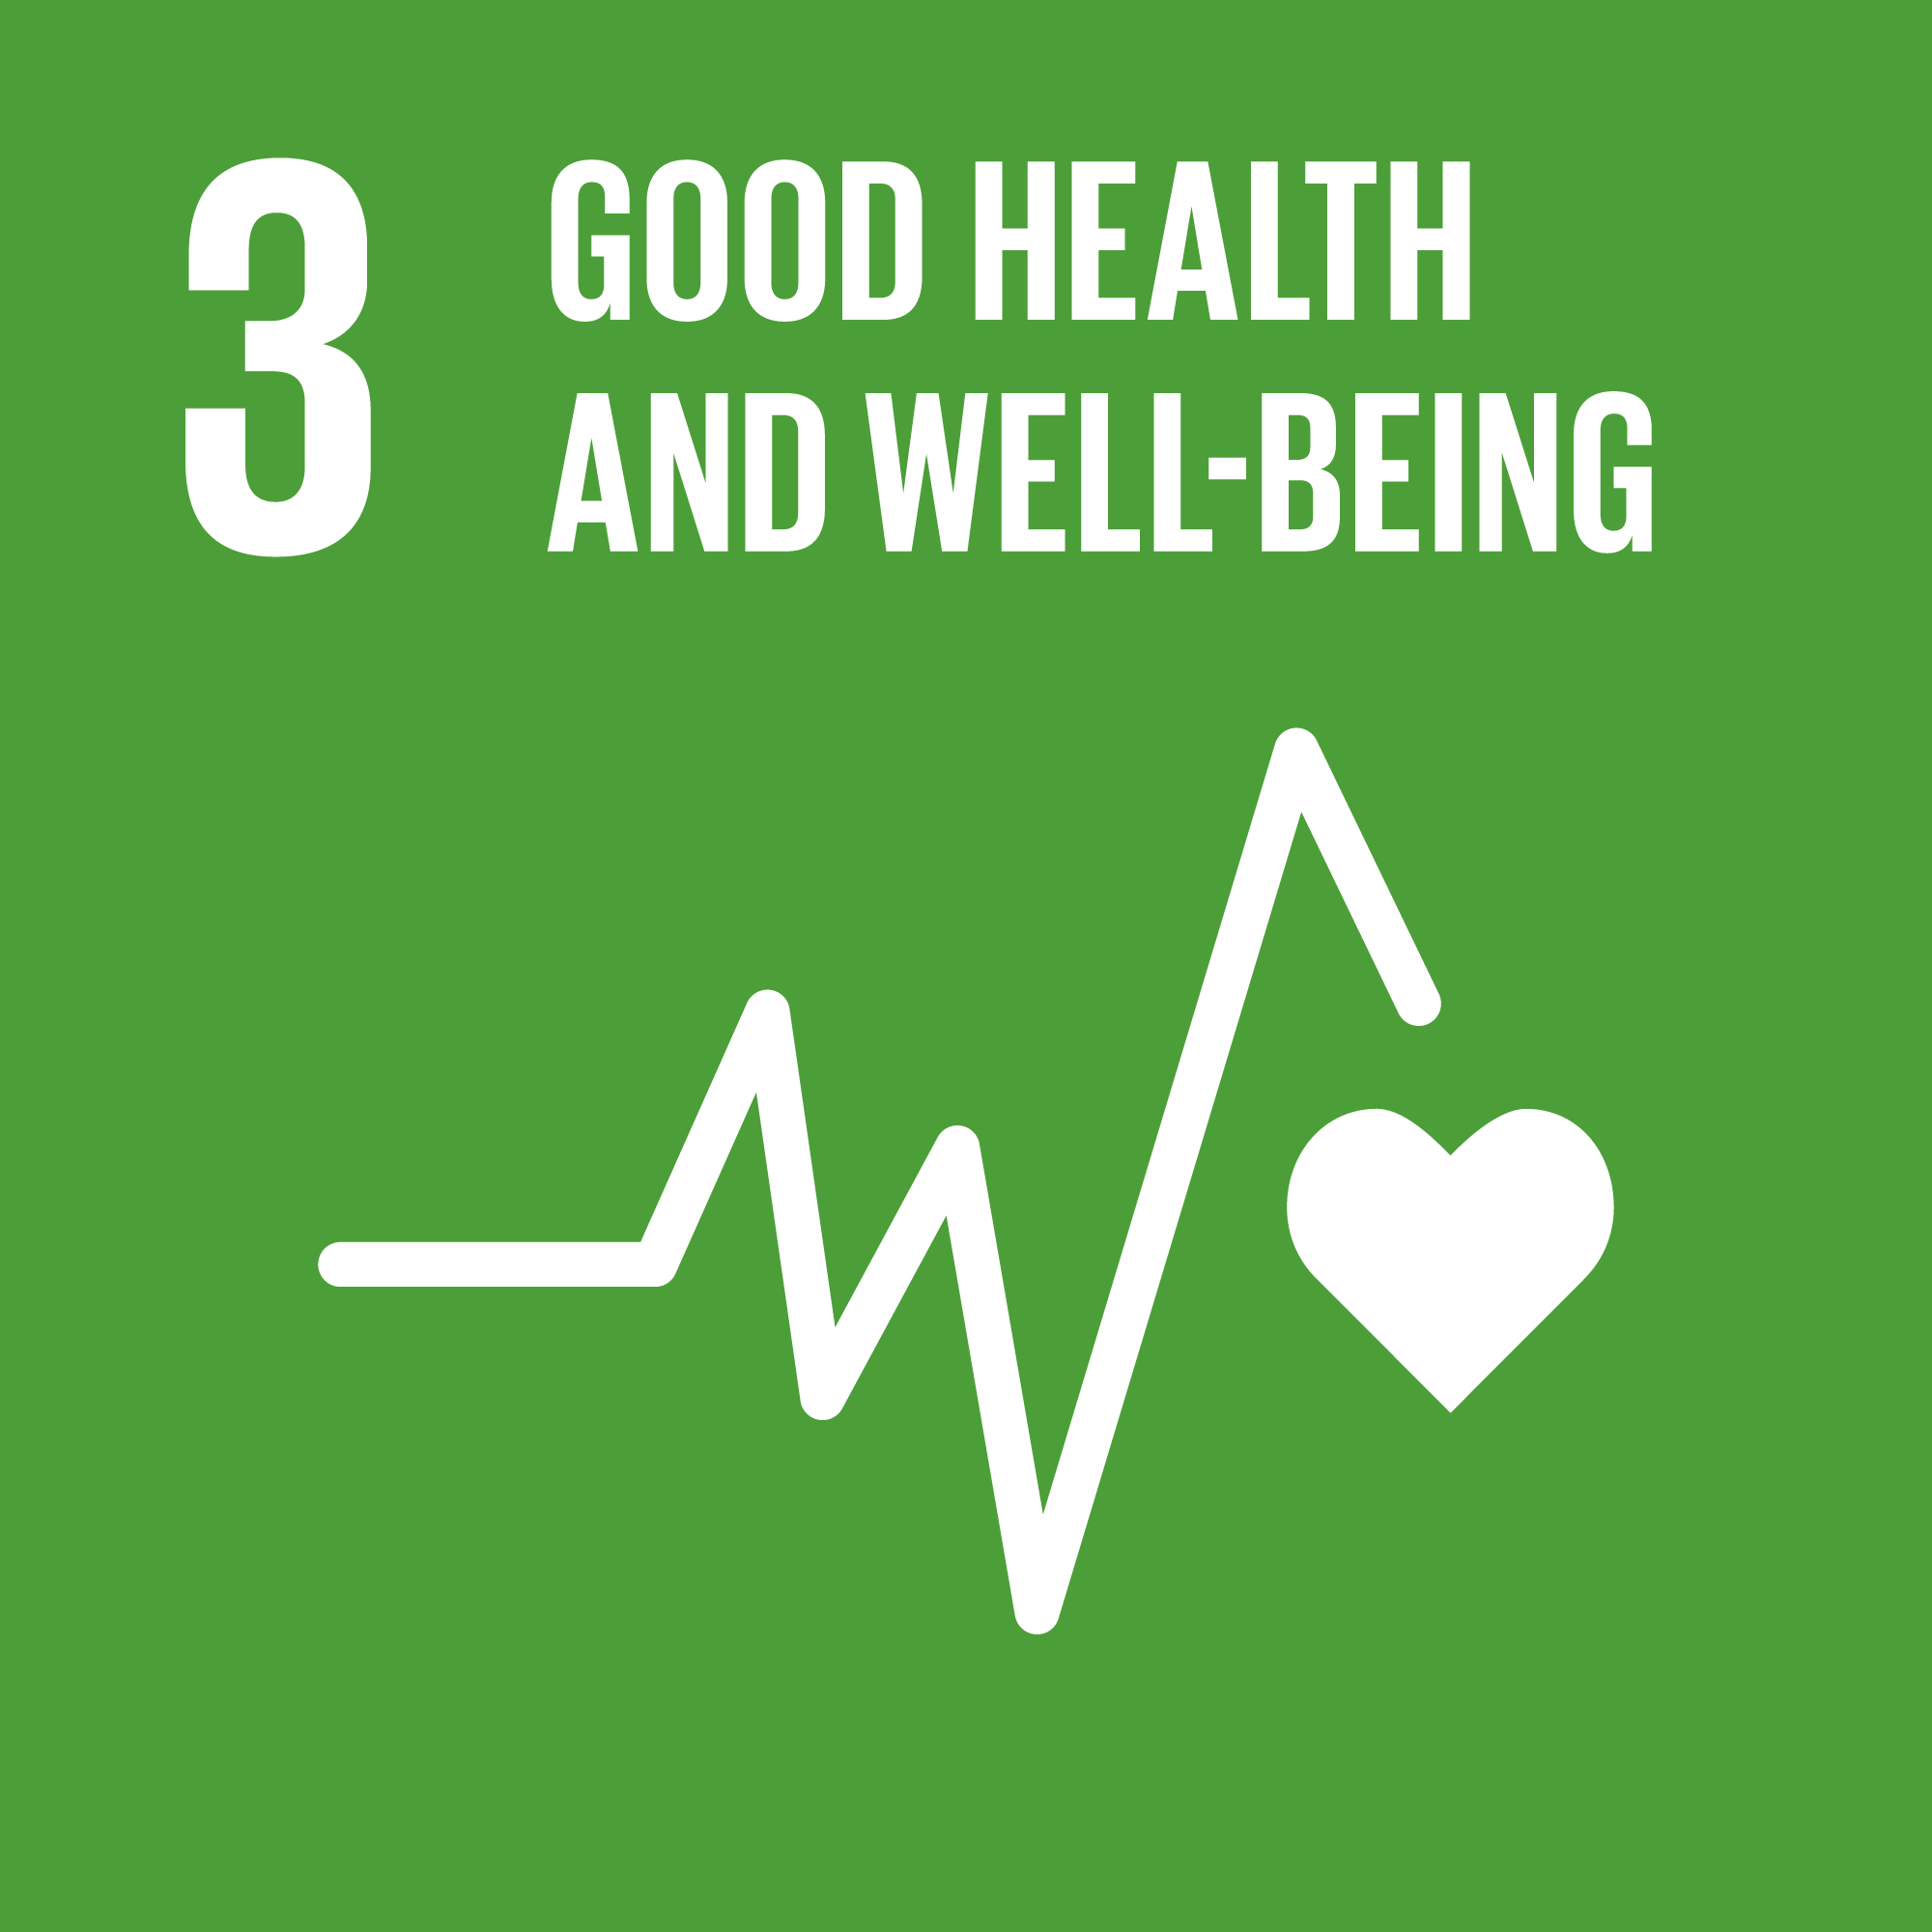 Goal 3: Good Health and Well-being - Ensure healthy lives and promote well-being for all at all ages.